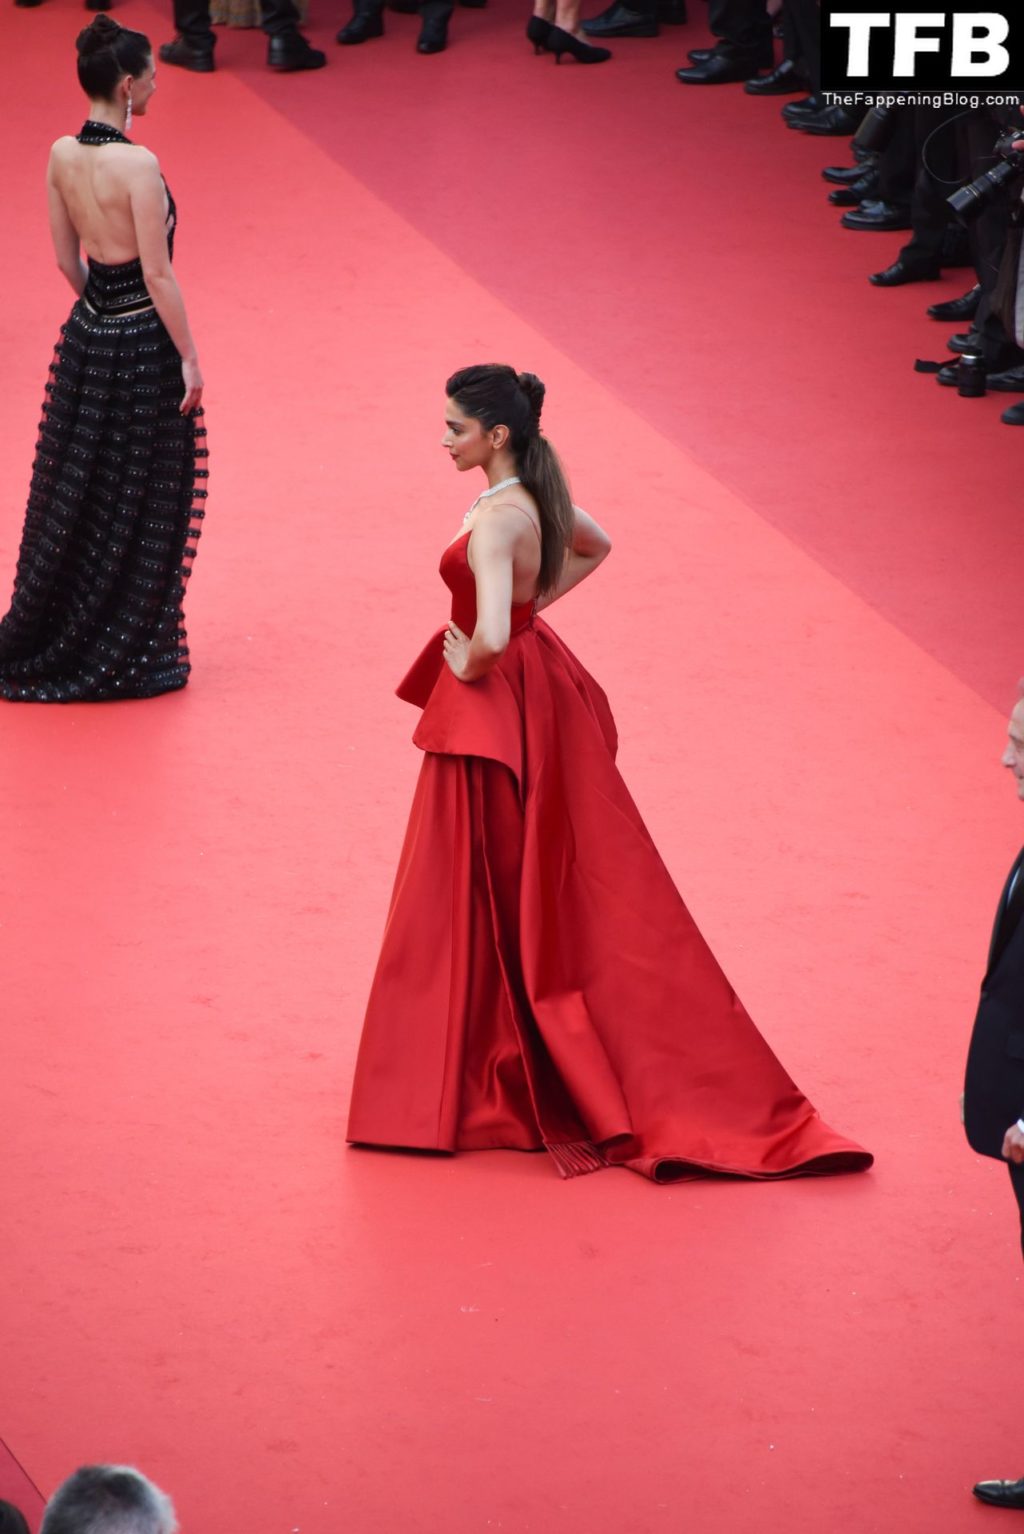 Deepika Padukone Sexy The Fappening Blog 24 1024x1534 - Deepika Padukone Looks Beautiful in a Red Dress During the 75th Annual Cannes Film Festival (150 Photos)